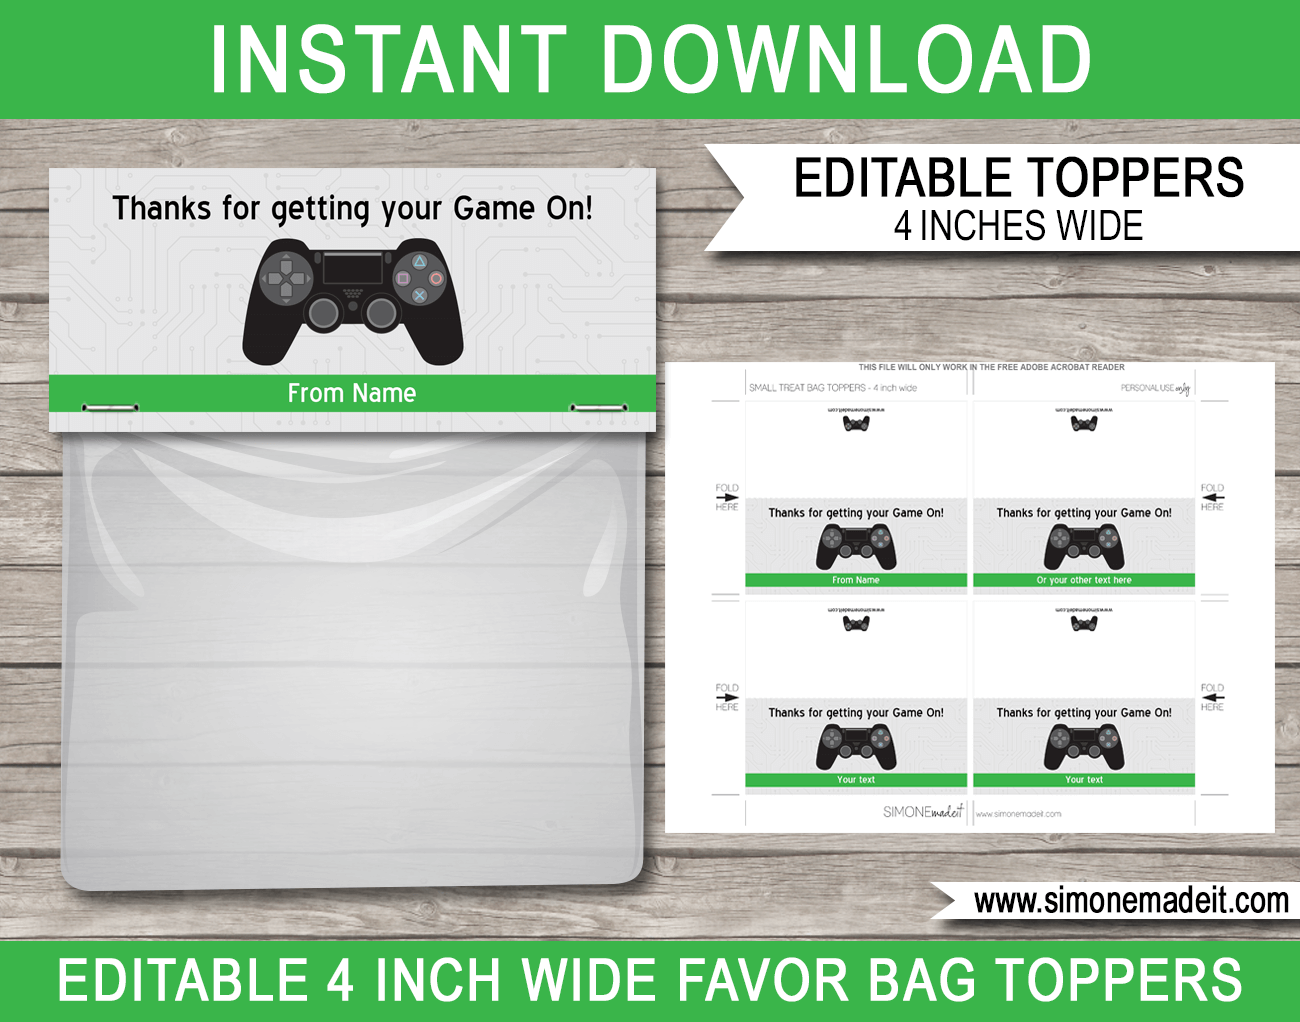 Printable Playstation Party Favor Bag Toppers | Playstation controller | Video Game Birthday Party | Editable DIY Template | $3.00 INSTANT DOWNLOAD via SIMONEmadeit.com